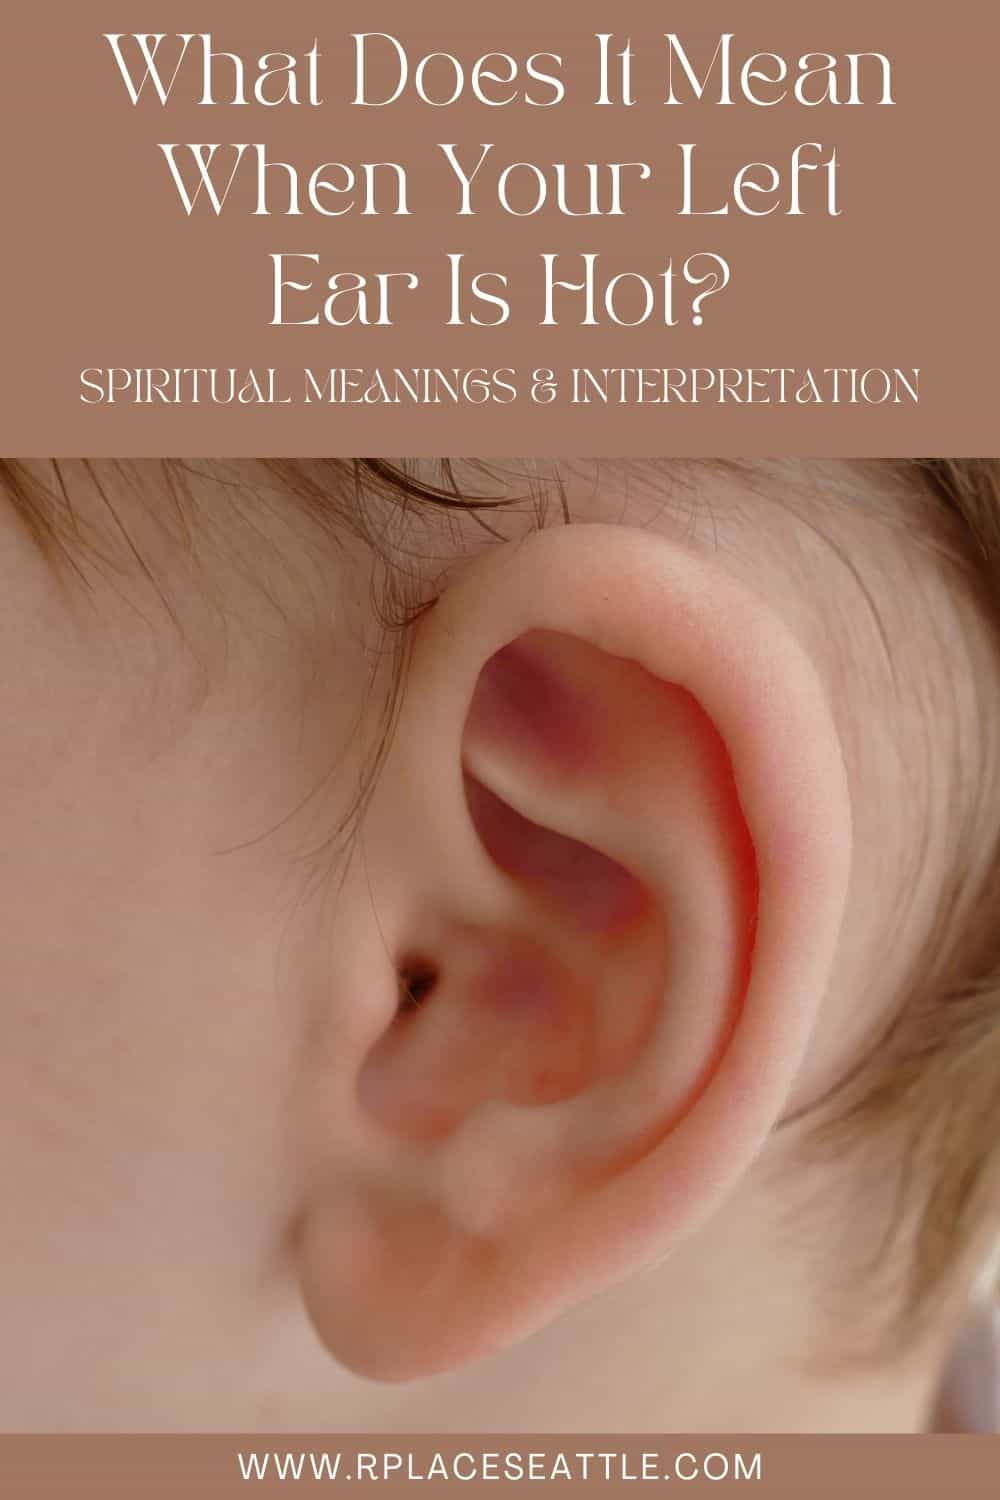 What Does It Mean When Your Left Ear Is Hot (Spiritual Meanings & Interpretation)